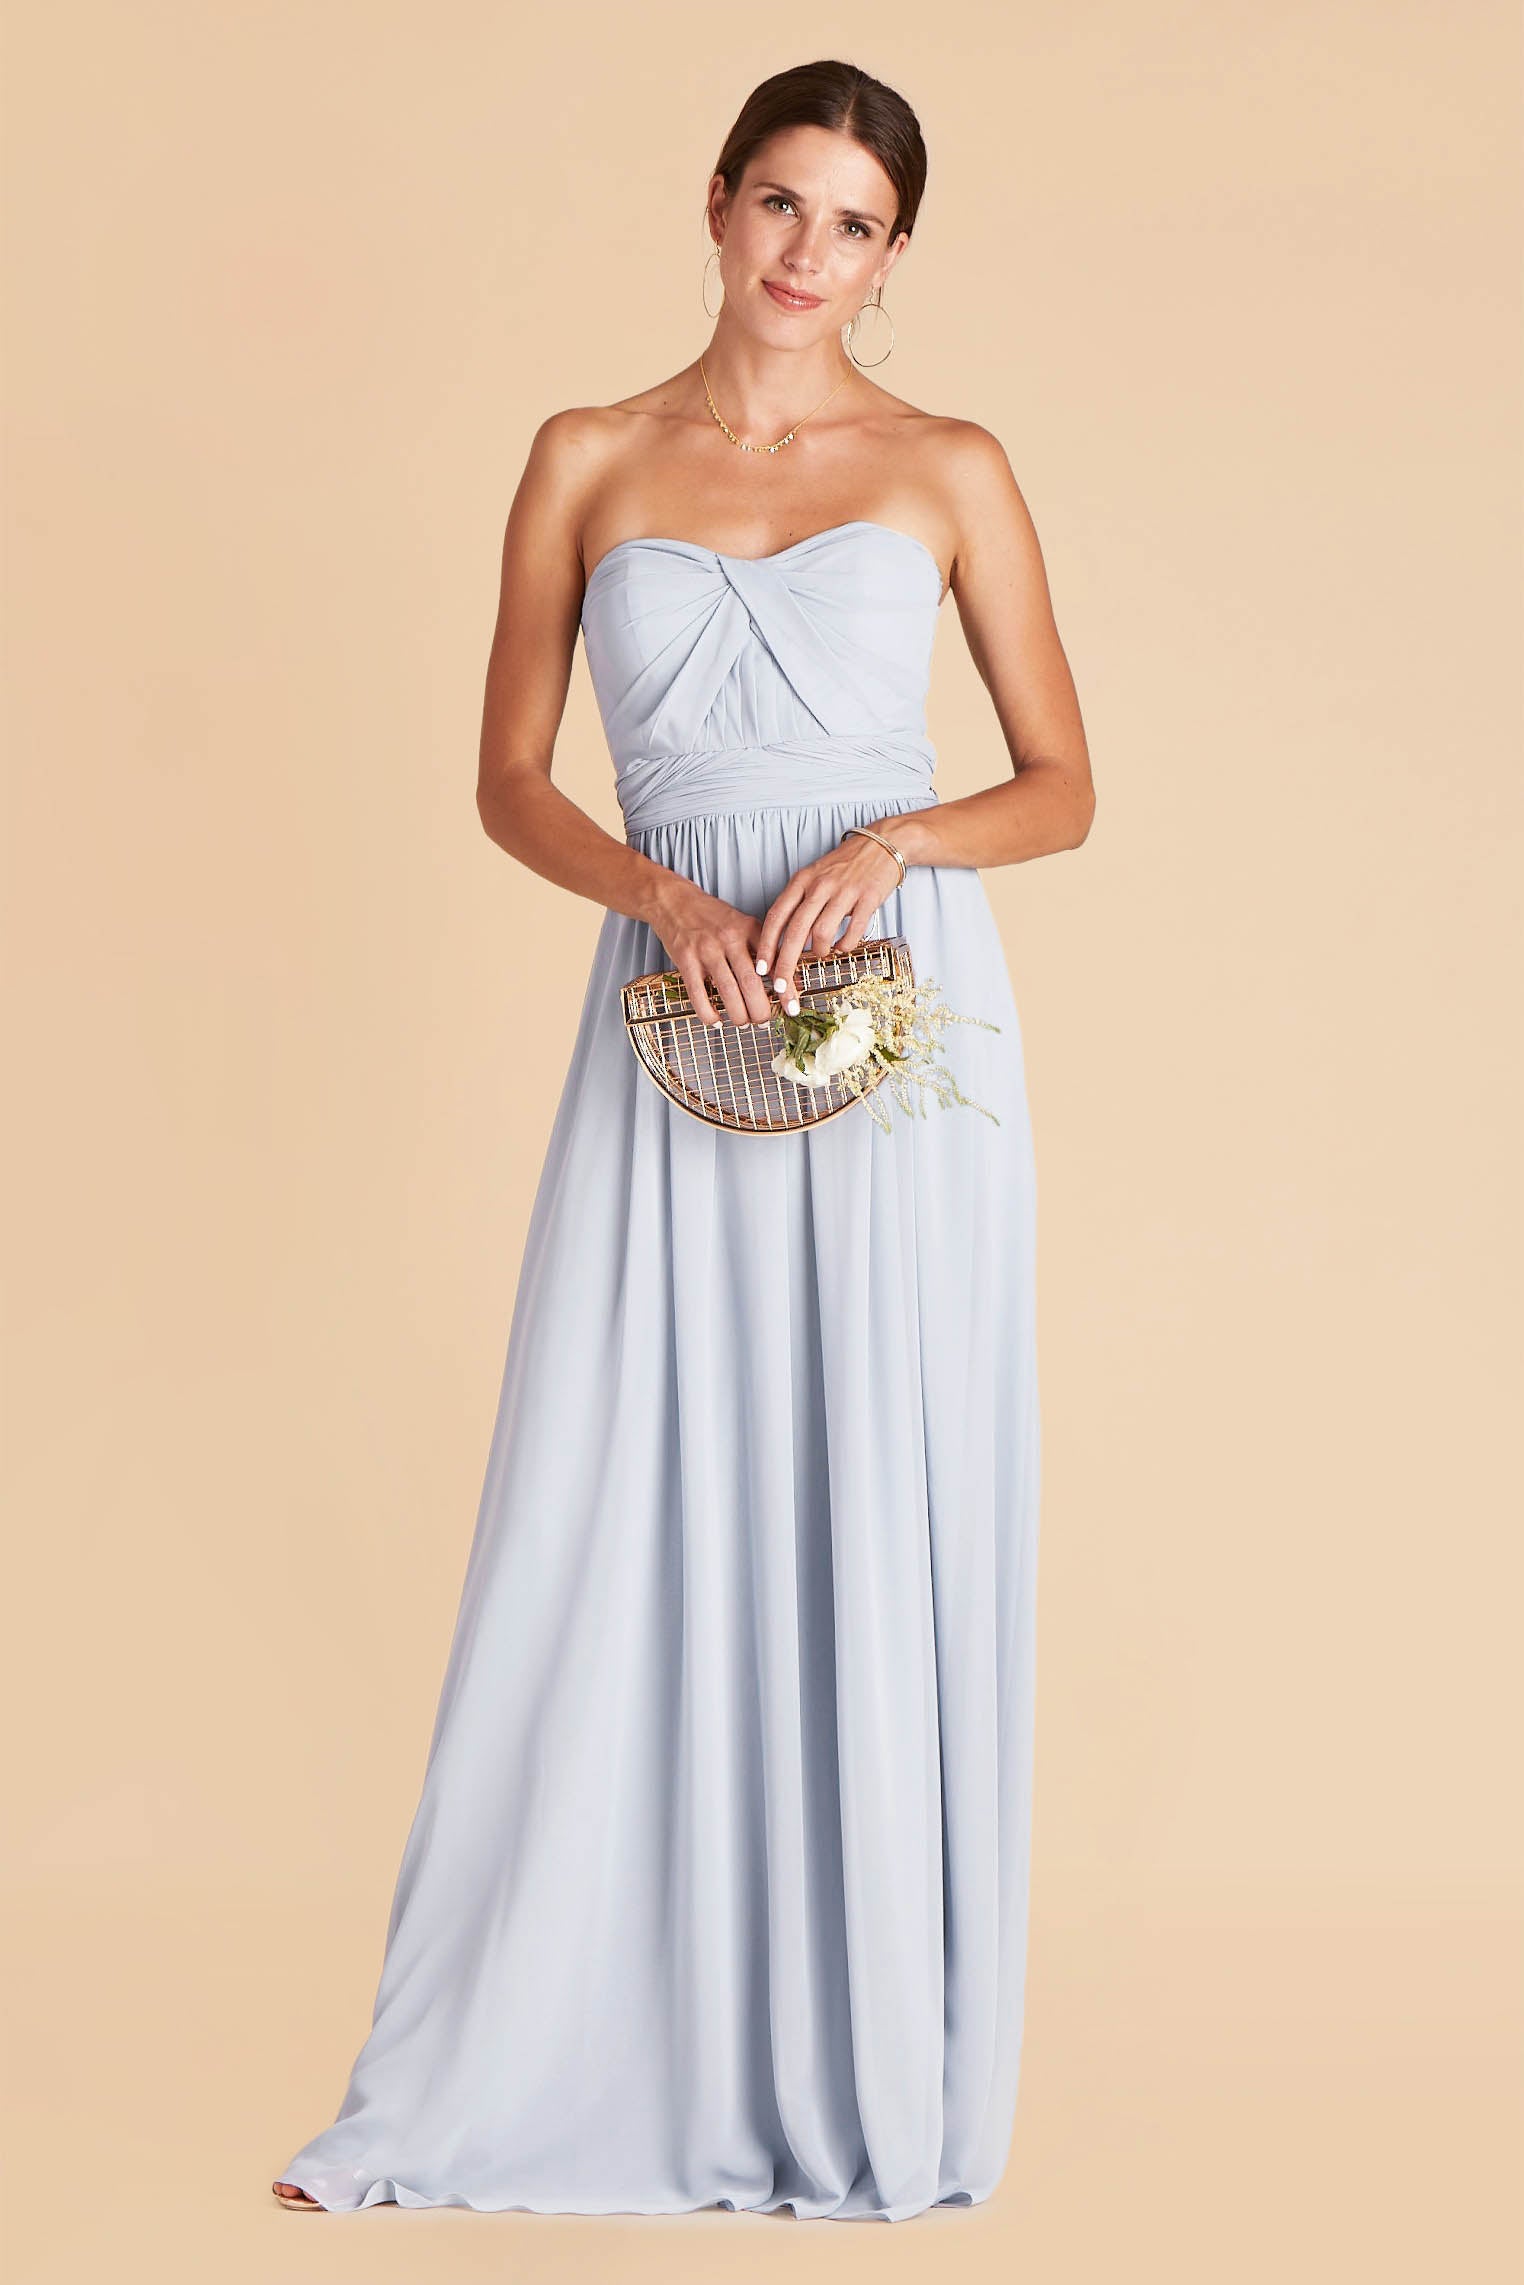 Grace convertible bridesmaid dress in ice blue chiffon by Birdy Grey